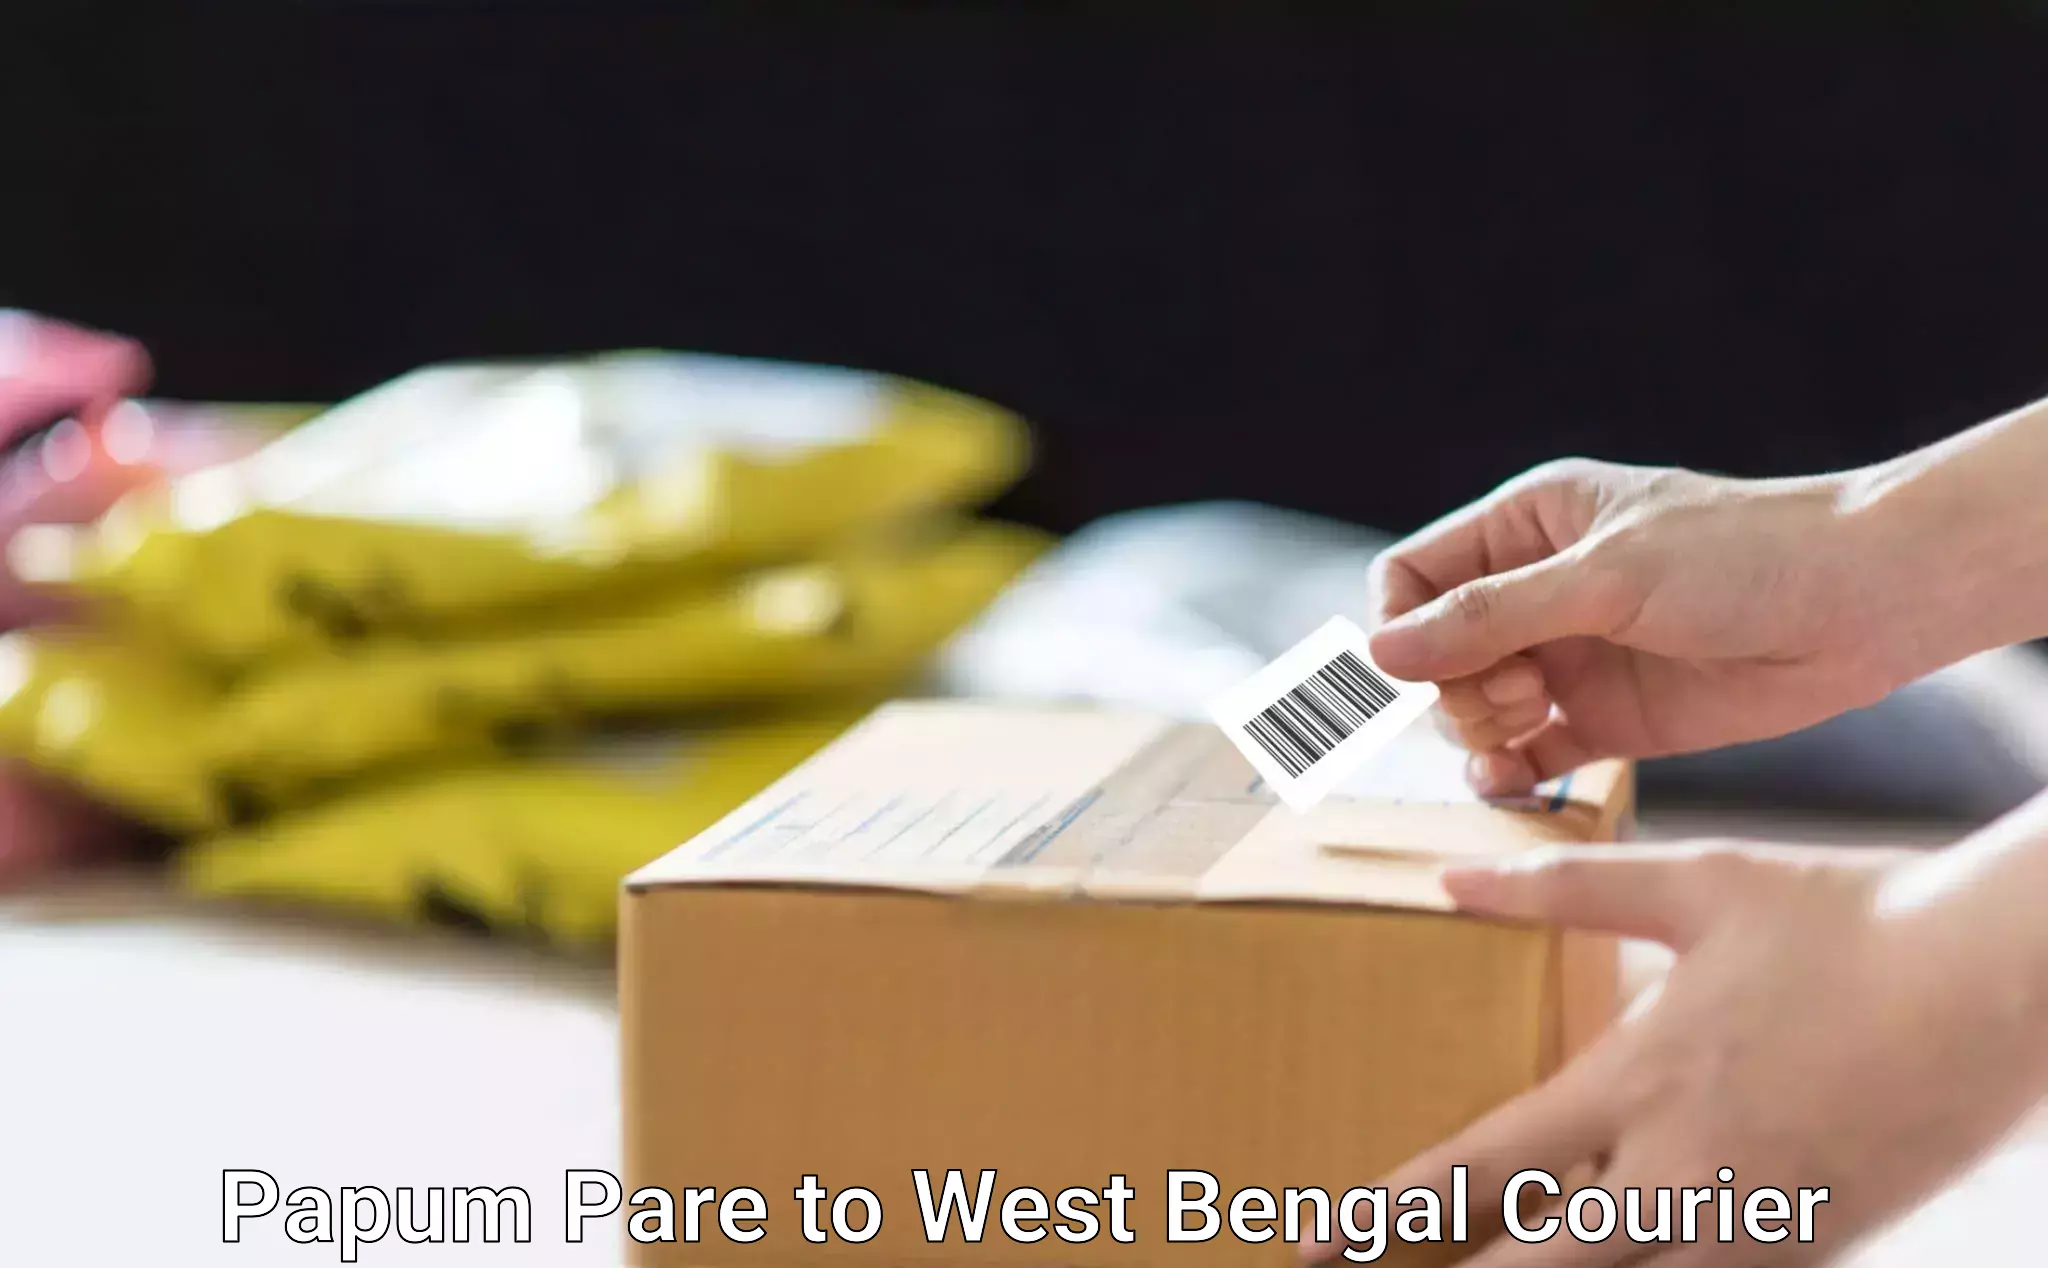 Budget-friendly shipping Papum Pare to West Bengal